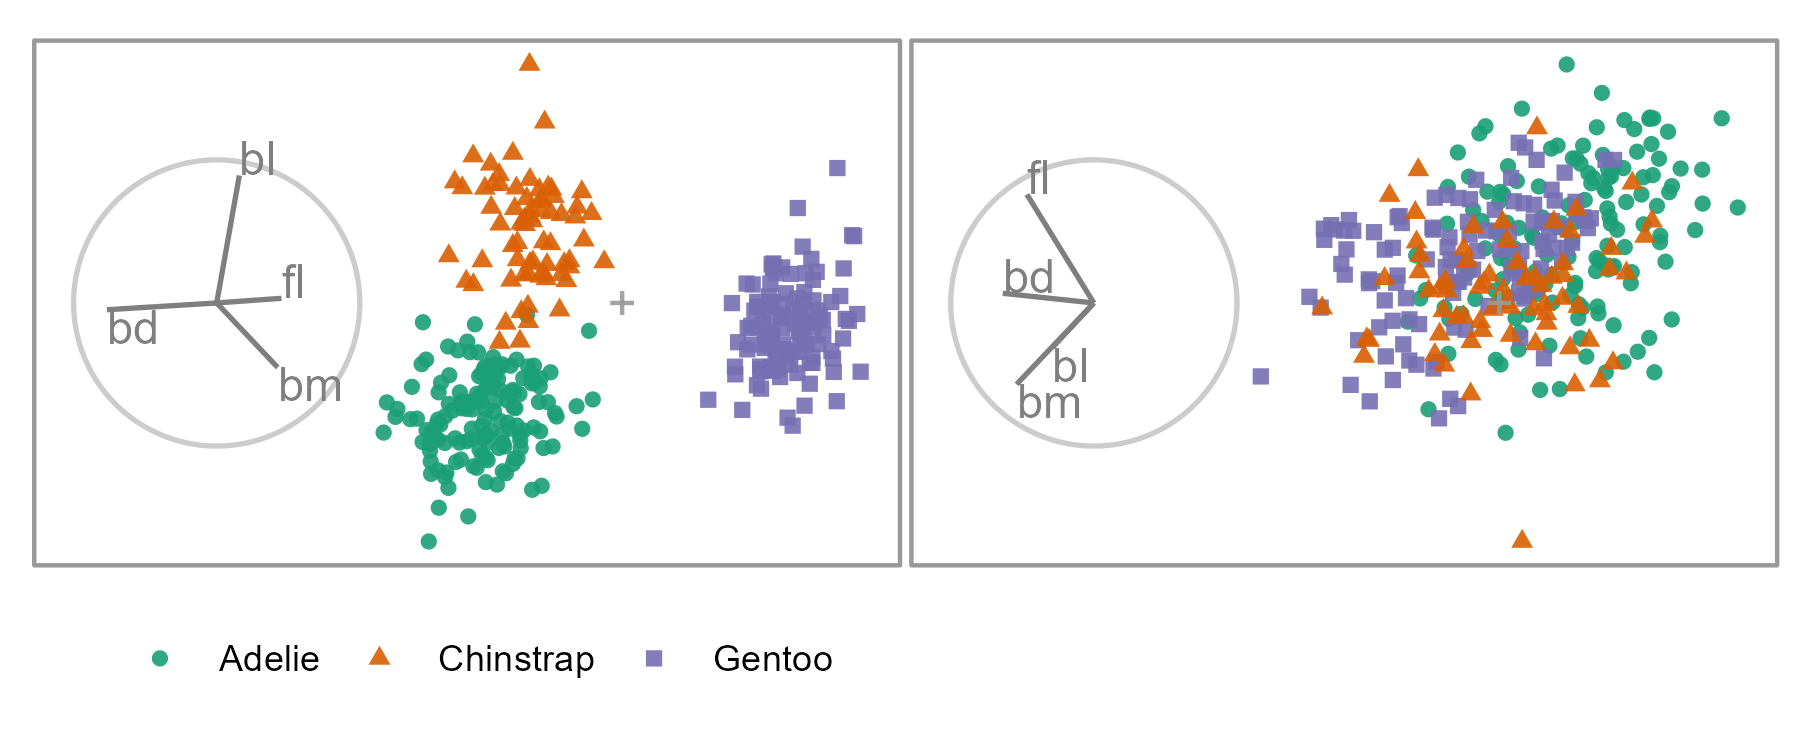 Two linear projections of penguins data. Biplot circles depict the basis indicating the direction and magnitude of the variable contributions. In the left panel, the direction of the separation between the orange and green clusters is in the direction that bl contributes, meaning that this variable is sensitive to the separation of this cluster. The purple cluster’s separation is attributed primarily to bd and smaller contributions from fl and bm. Many other linear orientations do not resolve structures of interest, such as cluster separation (right panel). The Palmer Penguin data (Gorman et al. 2014; Horst et al. 2020) measures four physical variables: bill length (bl), bill depth (bd), flipper length (fl), and body mass (bm) for three species of penguins.